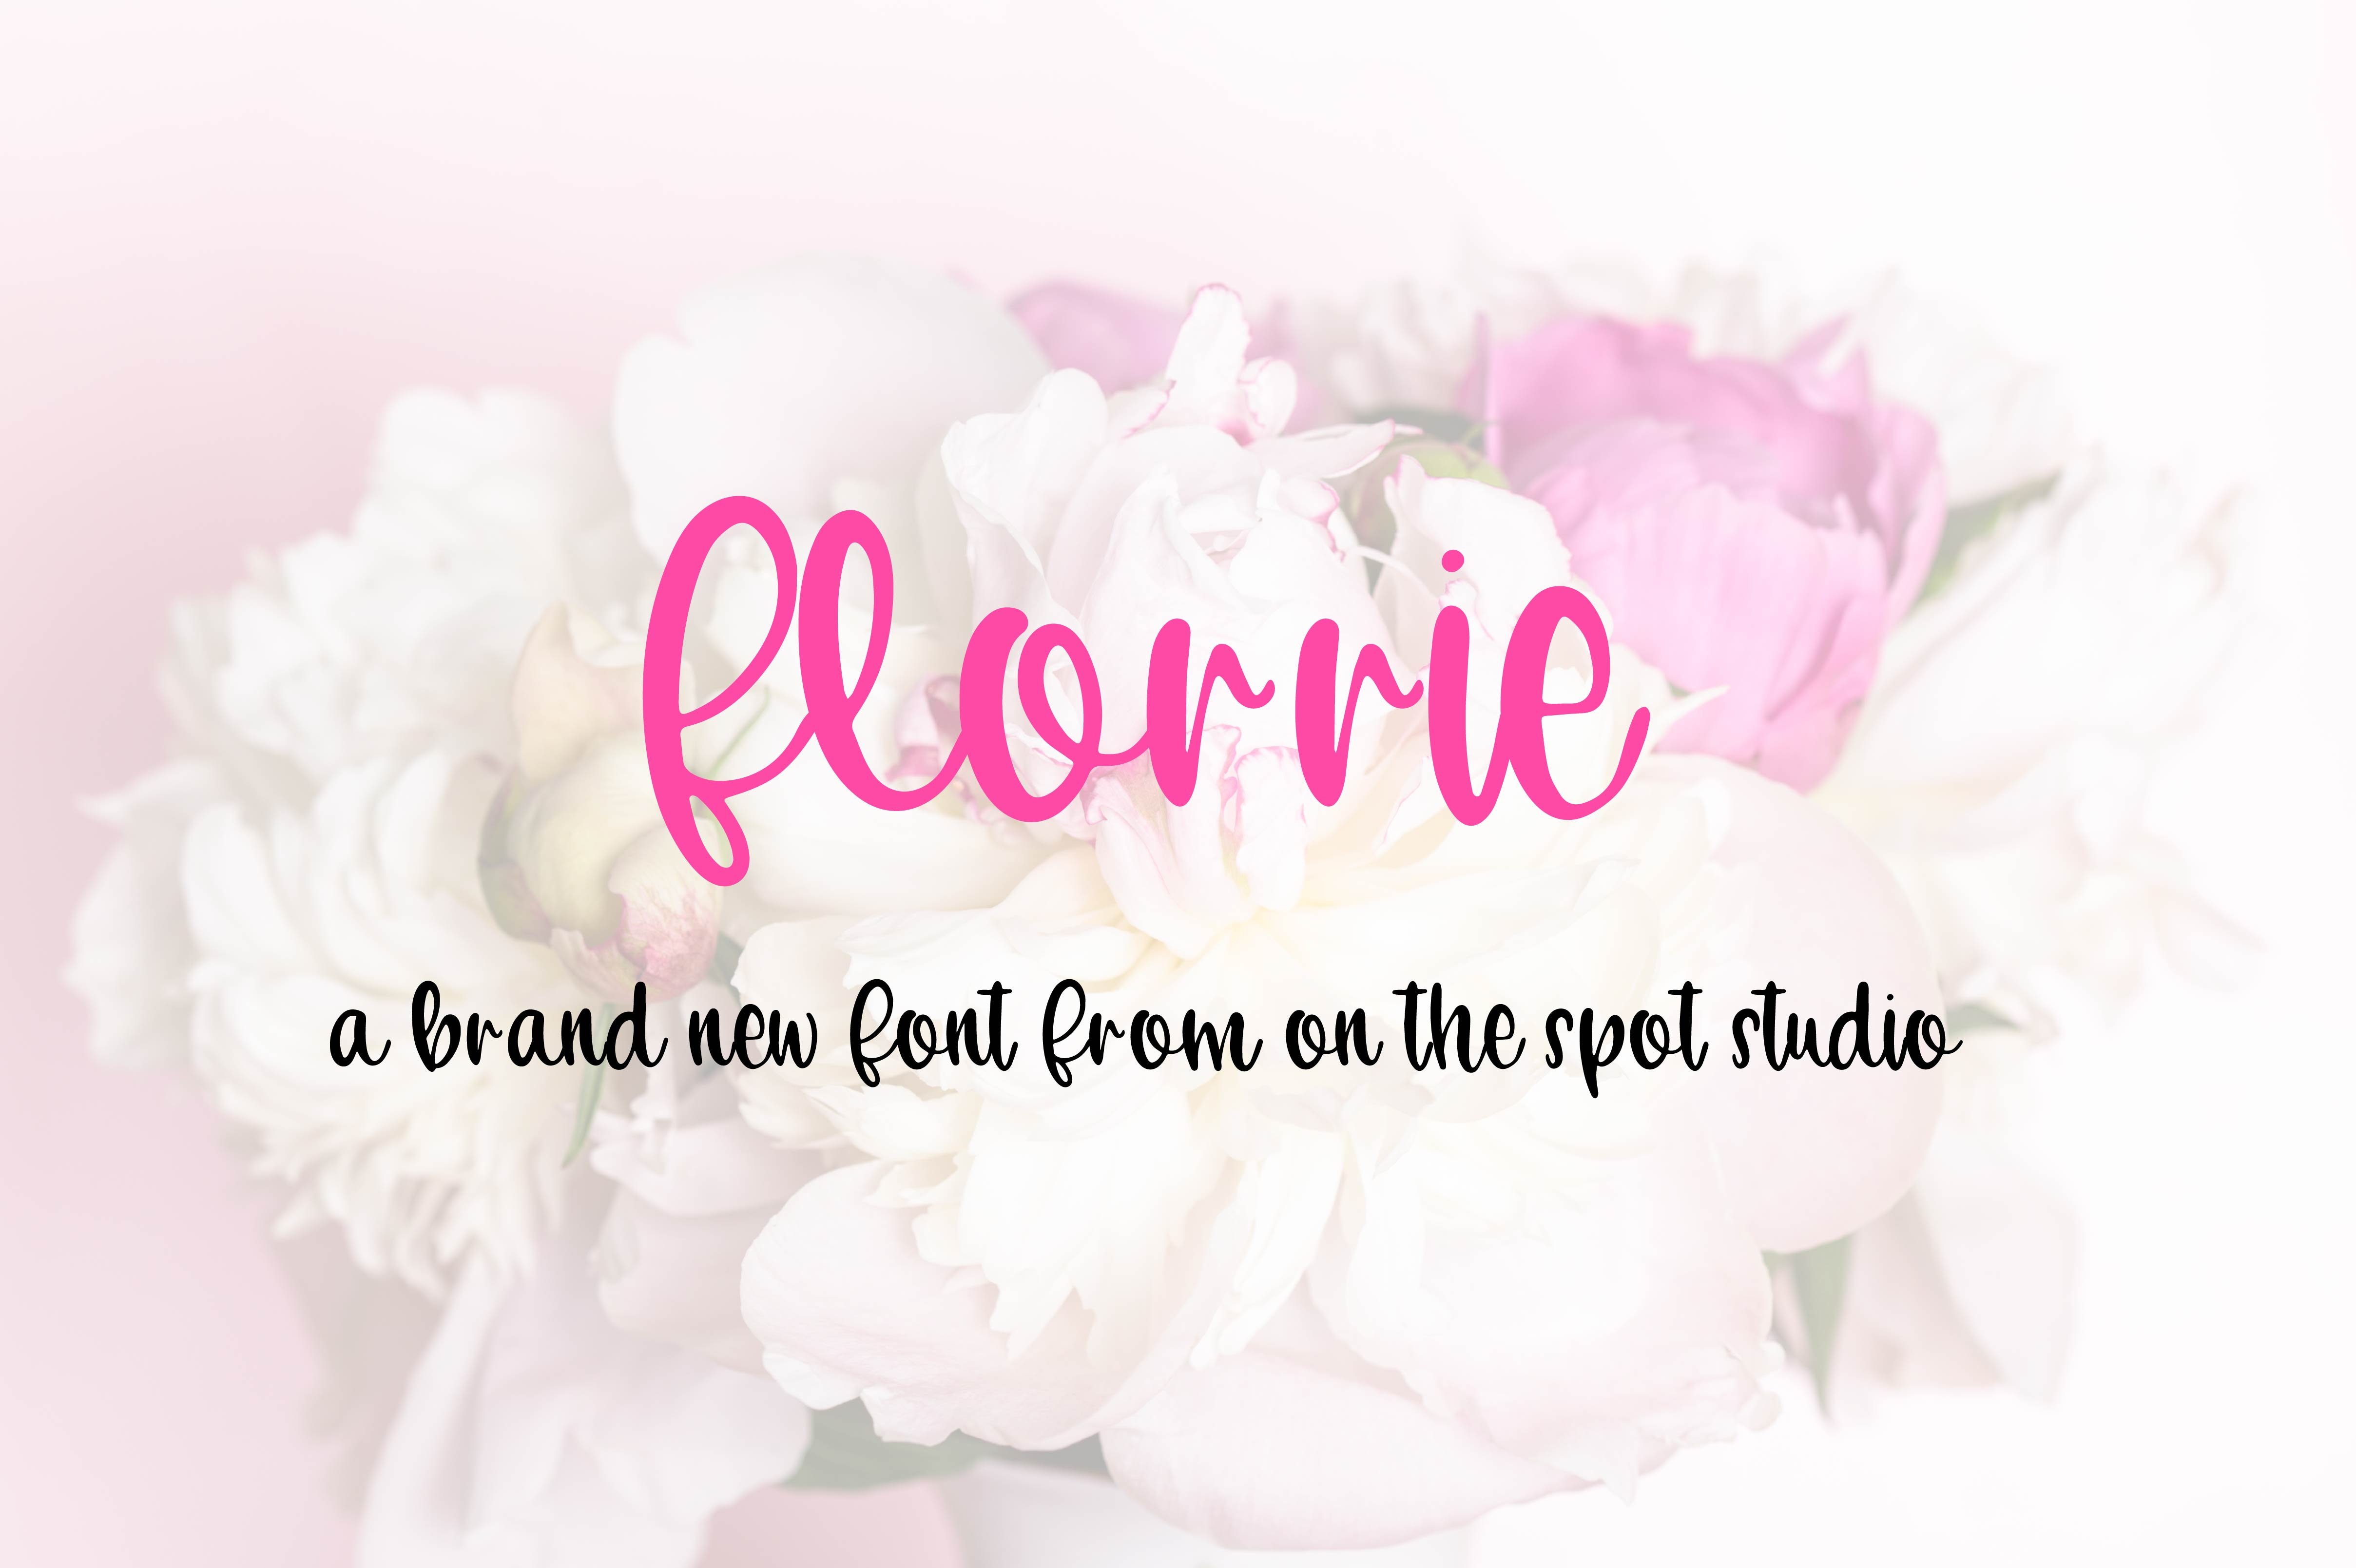 Florrie cover image.